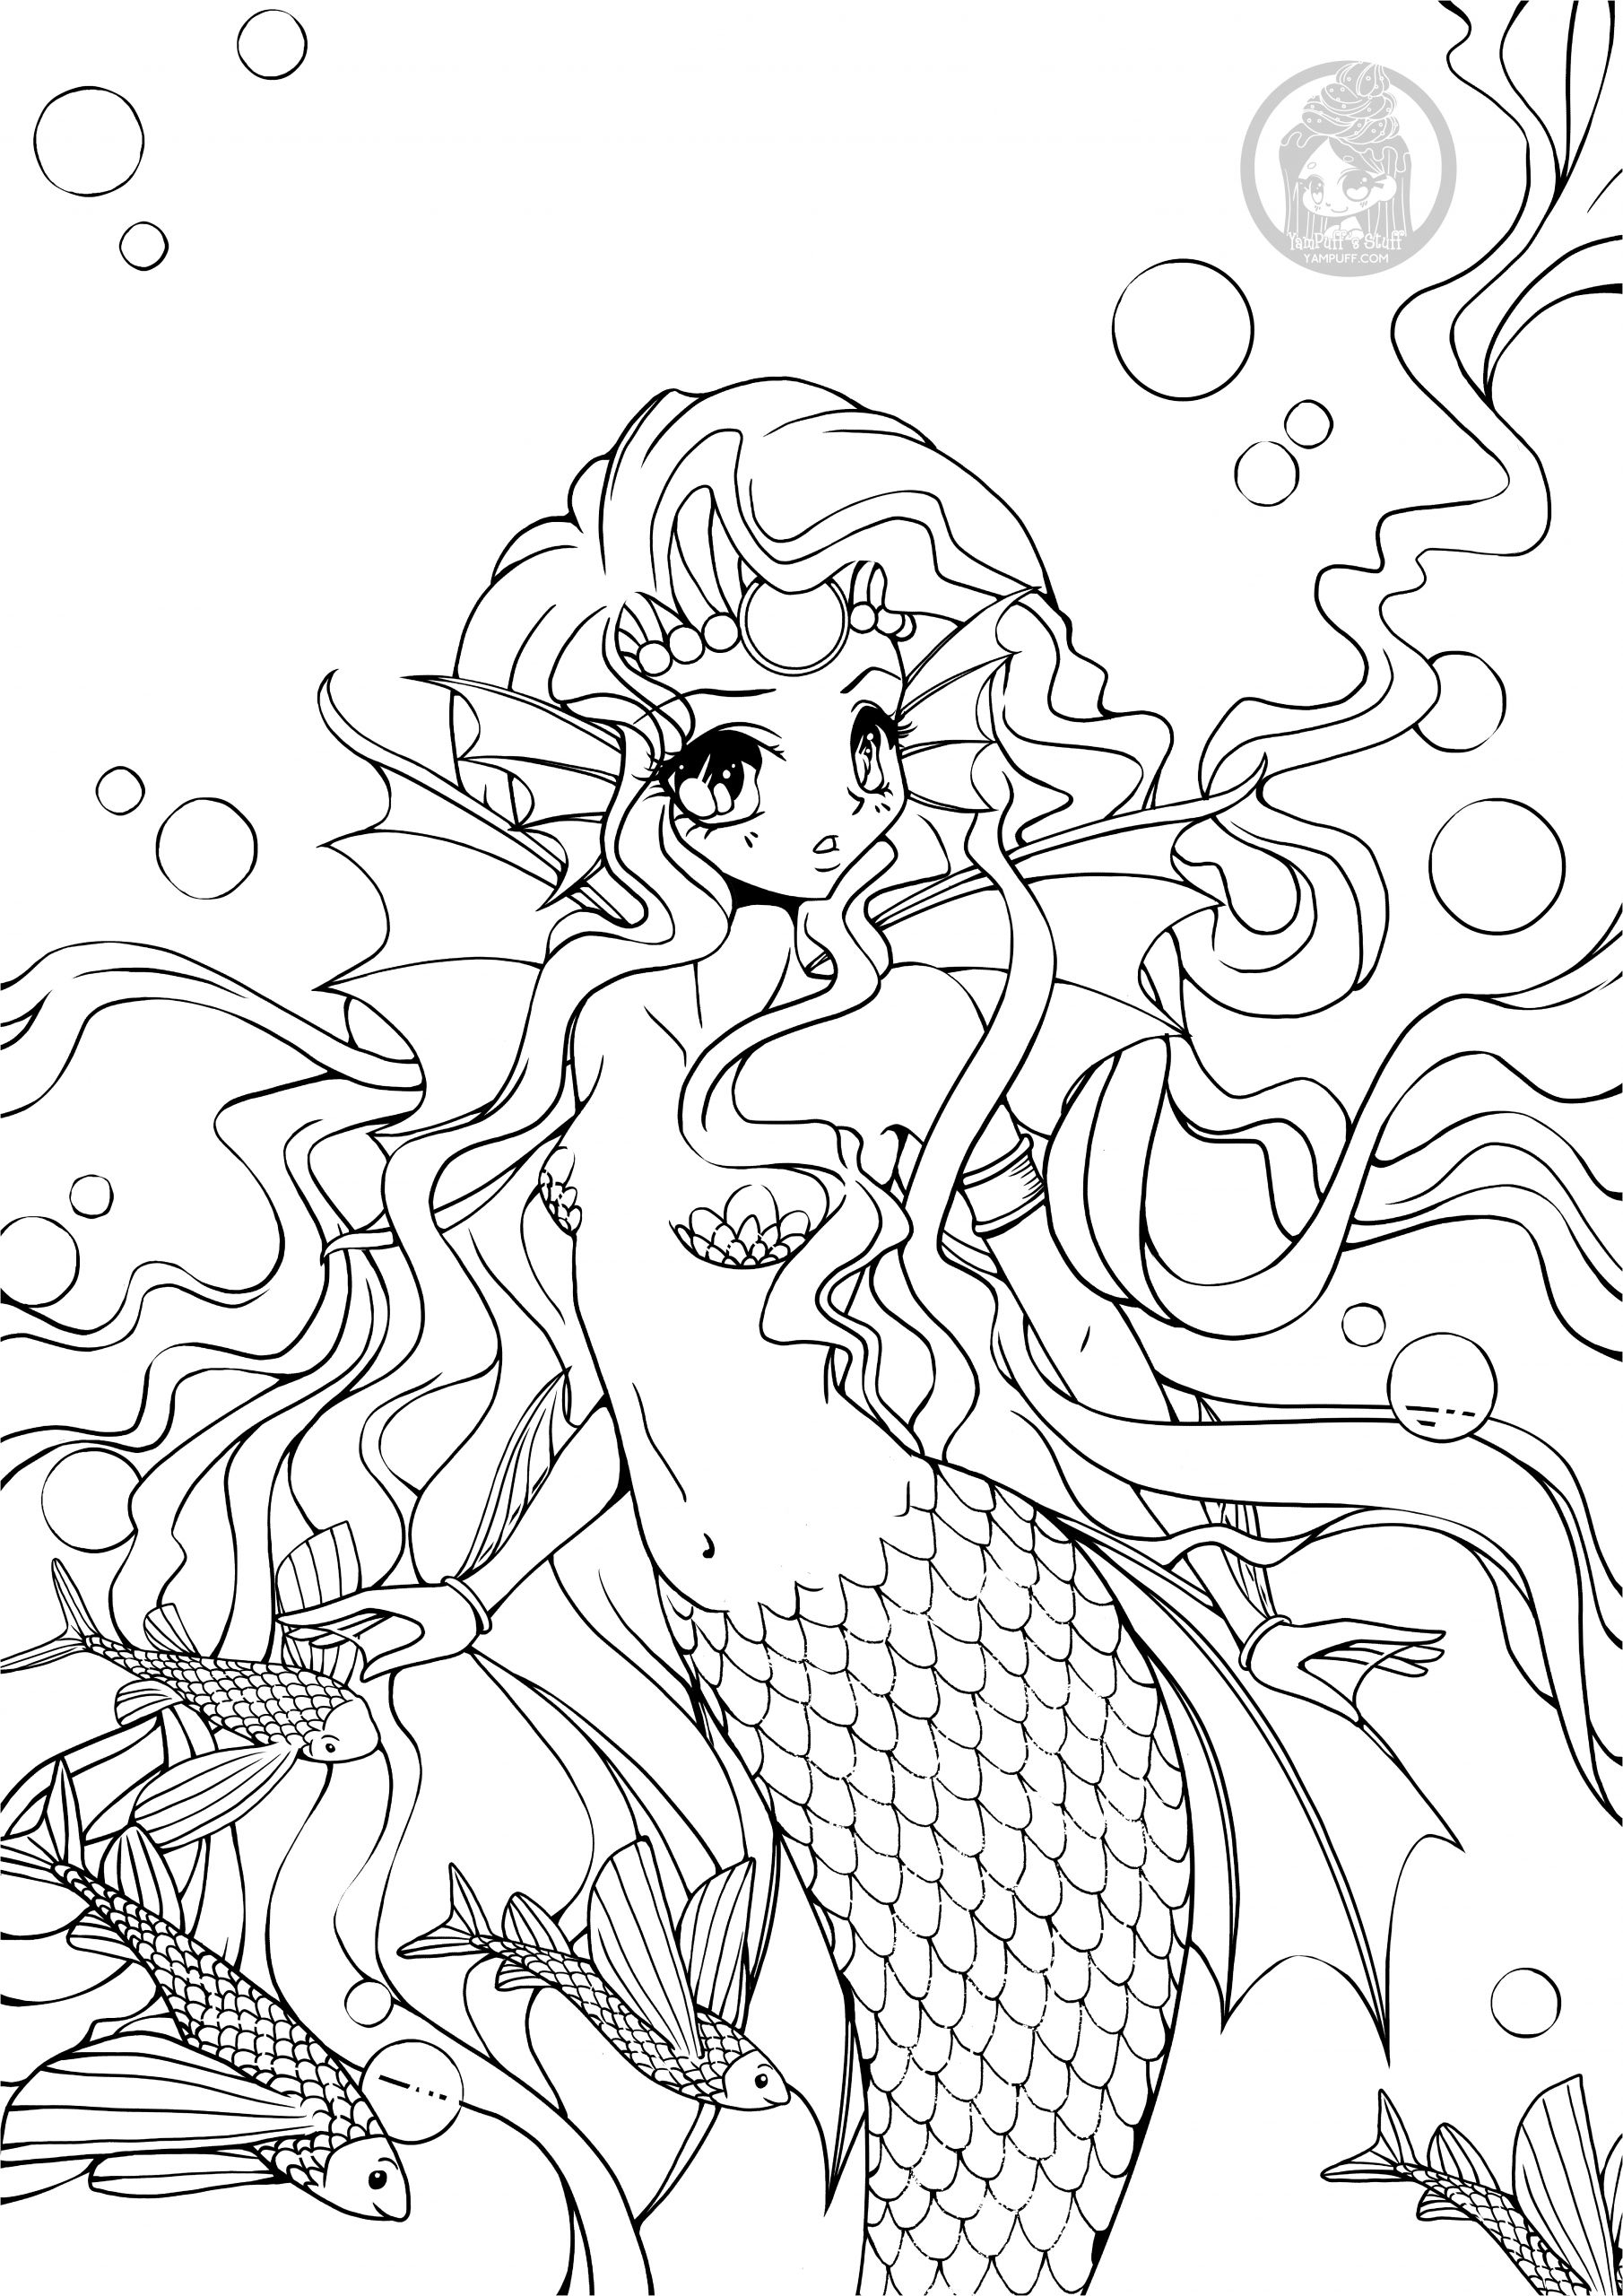 Coloriage De Sirene Inspiration Other Yampuff Coloring Pages • Yampuff S Stuff